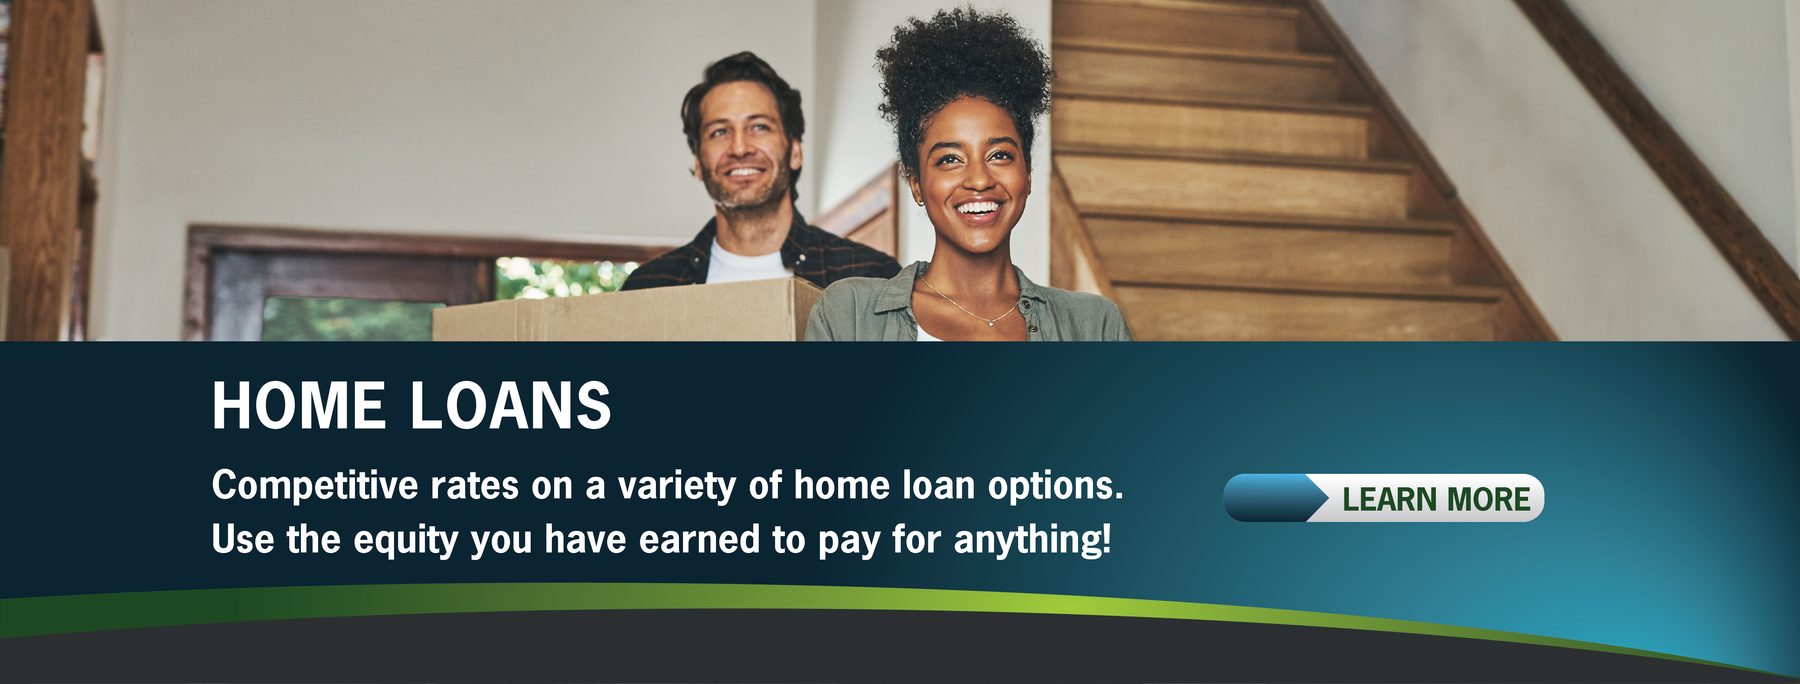 Home Loans and Home Equity Loans